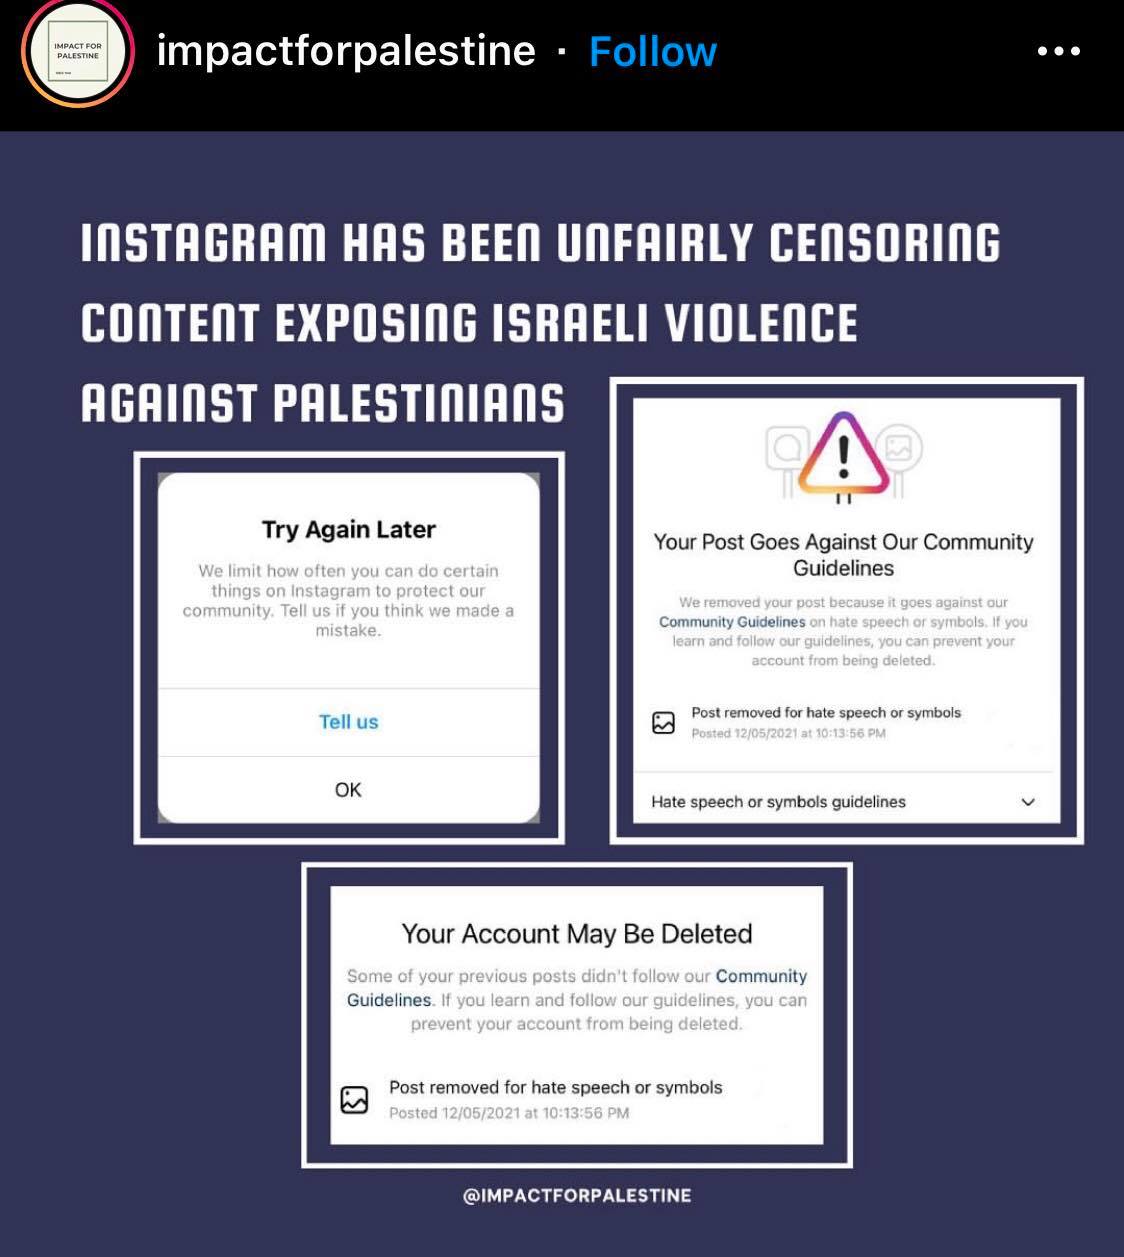 An Instagram post from "Impact for Palestine's" exposes Instagram's censorship of criticism of Israeli state violence in May 2021.